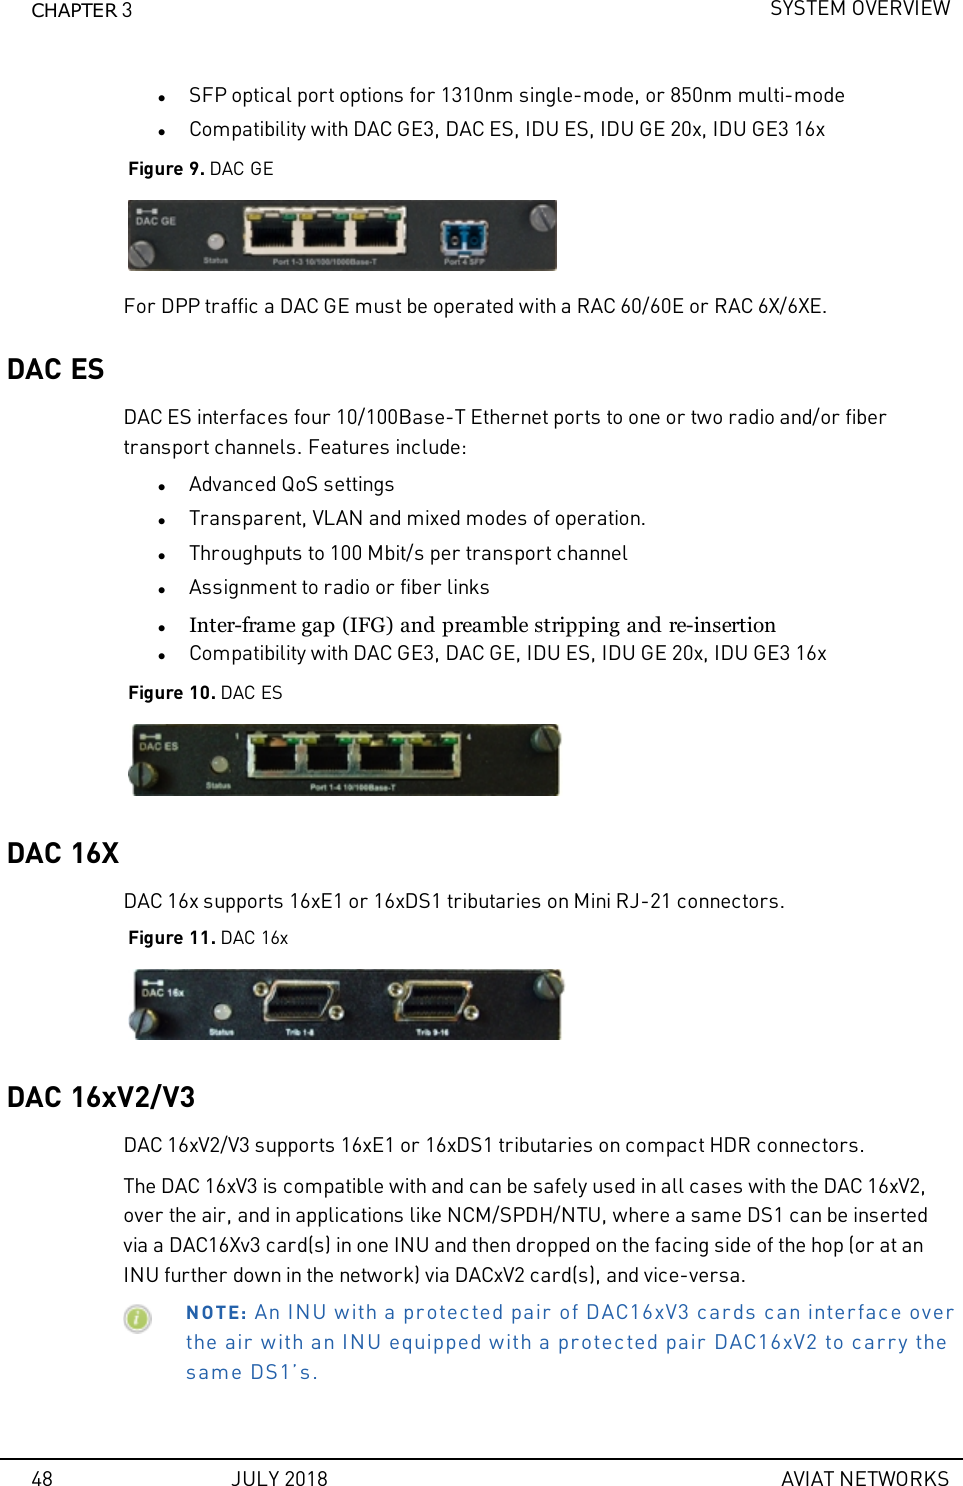 CHAPTER 3SYSTEM OVERVIEWlSFP optical port options for 1310nm single-mode, or 850nm multi-modelCompatibility with DAC GE3, DAC ES, IDU ES, IDU GE 20x, IDU GE3 16xFigure 9. DAC GEFor DPP traffic a DAC GE must be operated with a RAC 60/60E or RAC 6X/6XE.DAC ESDAC ES interfaces four 10/100Base-T Ethernet ports to one or two radio and/or fibertransport channels. Features include:lAdvanced QoS settingslTransparent, VLAN and mixed modes of operation.lThroughputs to 100 Mbit/s per transport channellAssignment to radio or fiber linkslInter-frame gap (IFG) and preamble stripping and re-insertionlCompatibility with DAC GE3, DAC GE, IDU ES, IDU GE 20x, IDU GE3 16xFigure 10. DAC ESDAC 16XDAC 16x supports 16xE1 or 16xDS1 tributaries on Mini RJ-21 connectors.Figure 11. DAC 16xDAC 16xV2/V3DAC 16xV2/V3 supports 16xE1 or 16xDS1 tributaries on compact HDR connectors.The DAC 16xV3 is compatible with and can be safely used in all cases with the DAC 16xV2,over the air, and in applications like NCM/SPDH/NTU, where a same DS1 can be insertedvia a DAC16Xv3 card(s) in one INU and then dropped on the facing side of the hop (or at anINU further down in the network) via DACxV2 card(s), and vice-versa.NOTE: An INU with a protected pair of DAC16xV3 cards can interface overthe air with an INU equipped with a protected pair DAC16xV2 to carry thesame DS1’s.48 JULY 2018 AVIAT NETWORKS